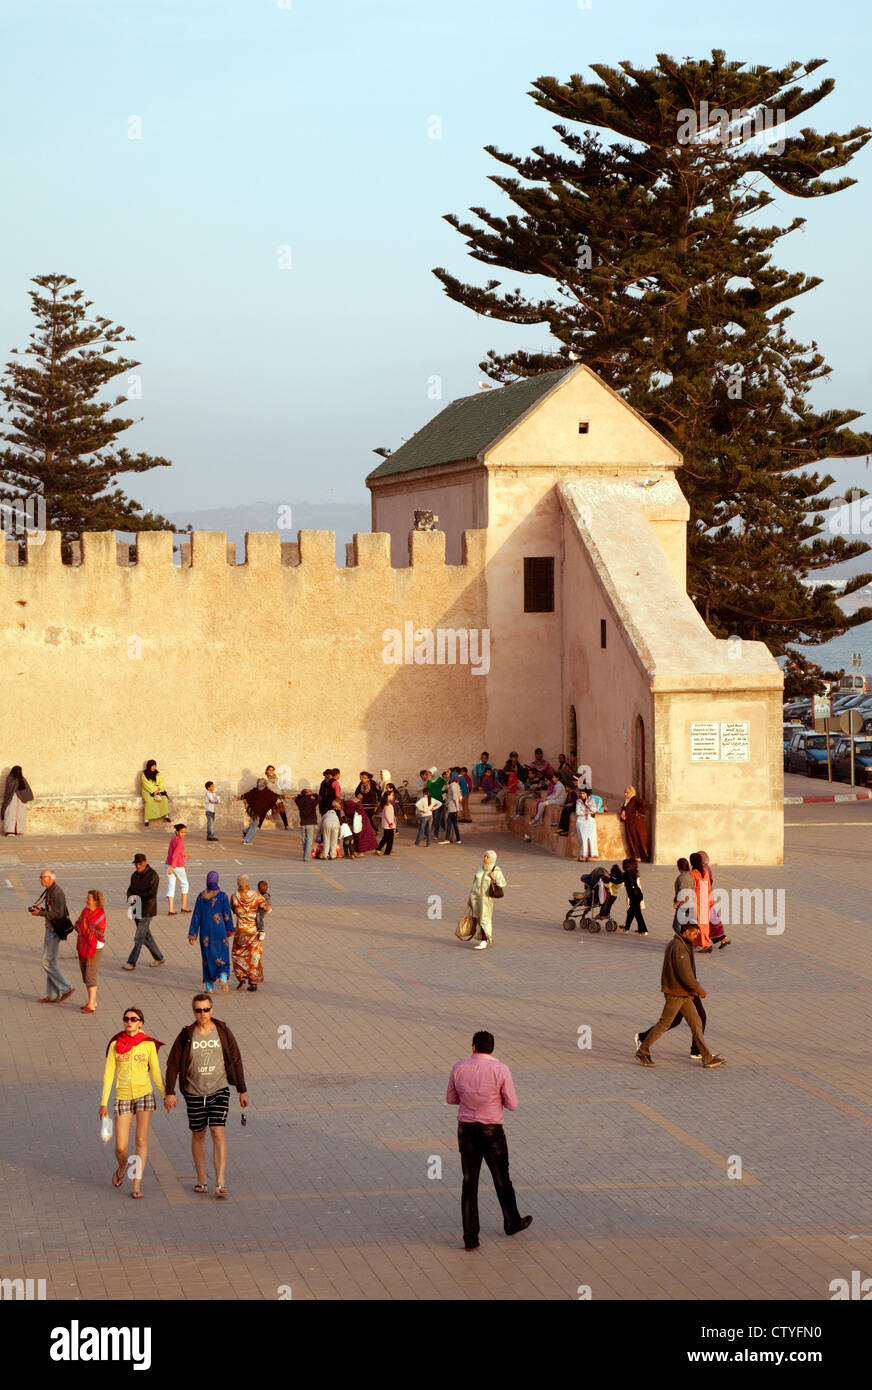 Evening in Place Moulay Hassan square, Essaouira, Morocco North Africa Stock Photo